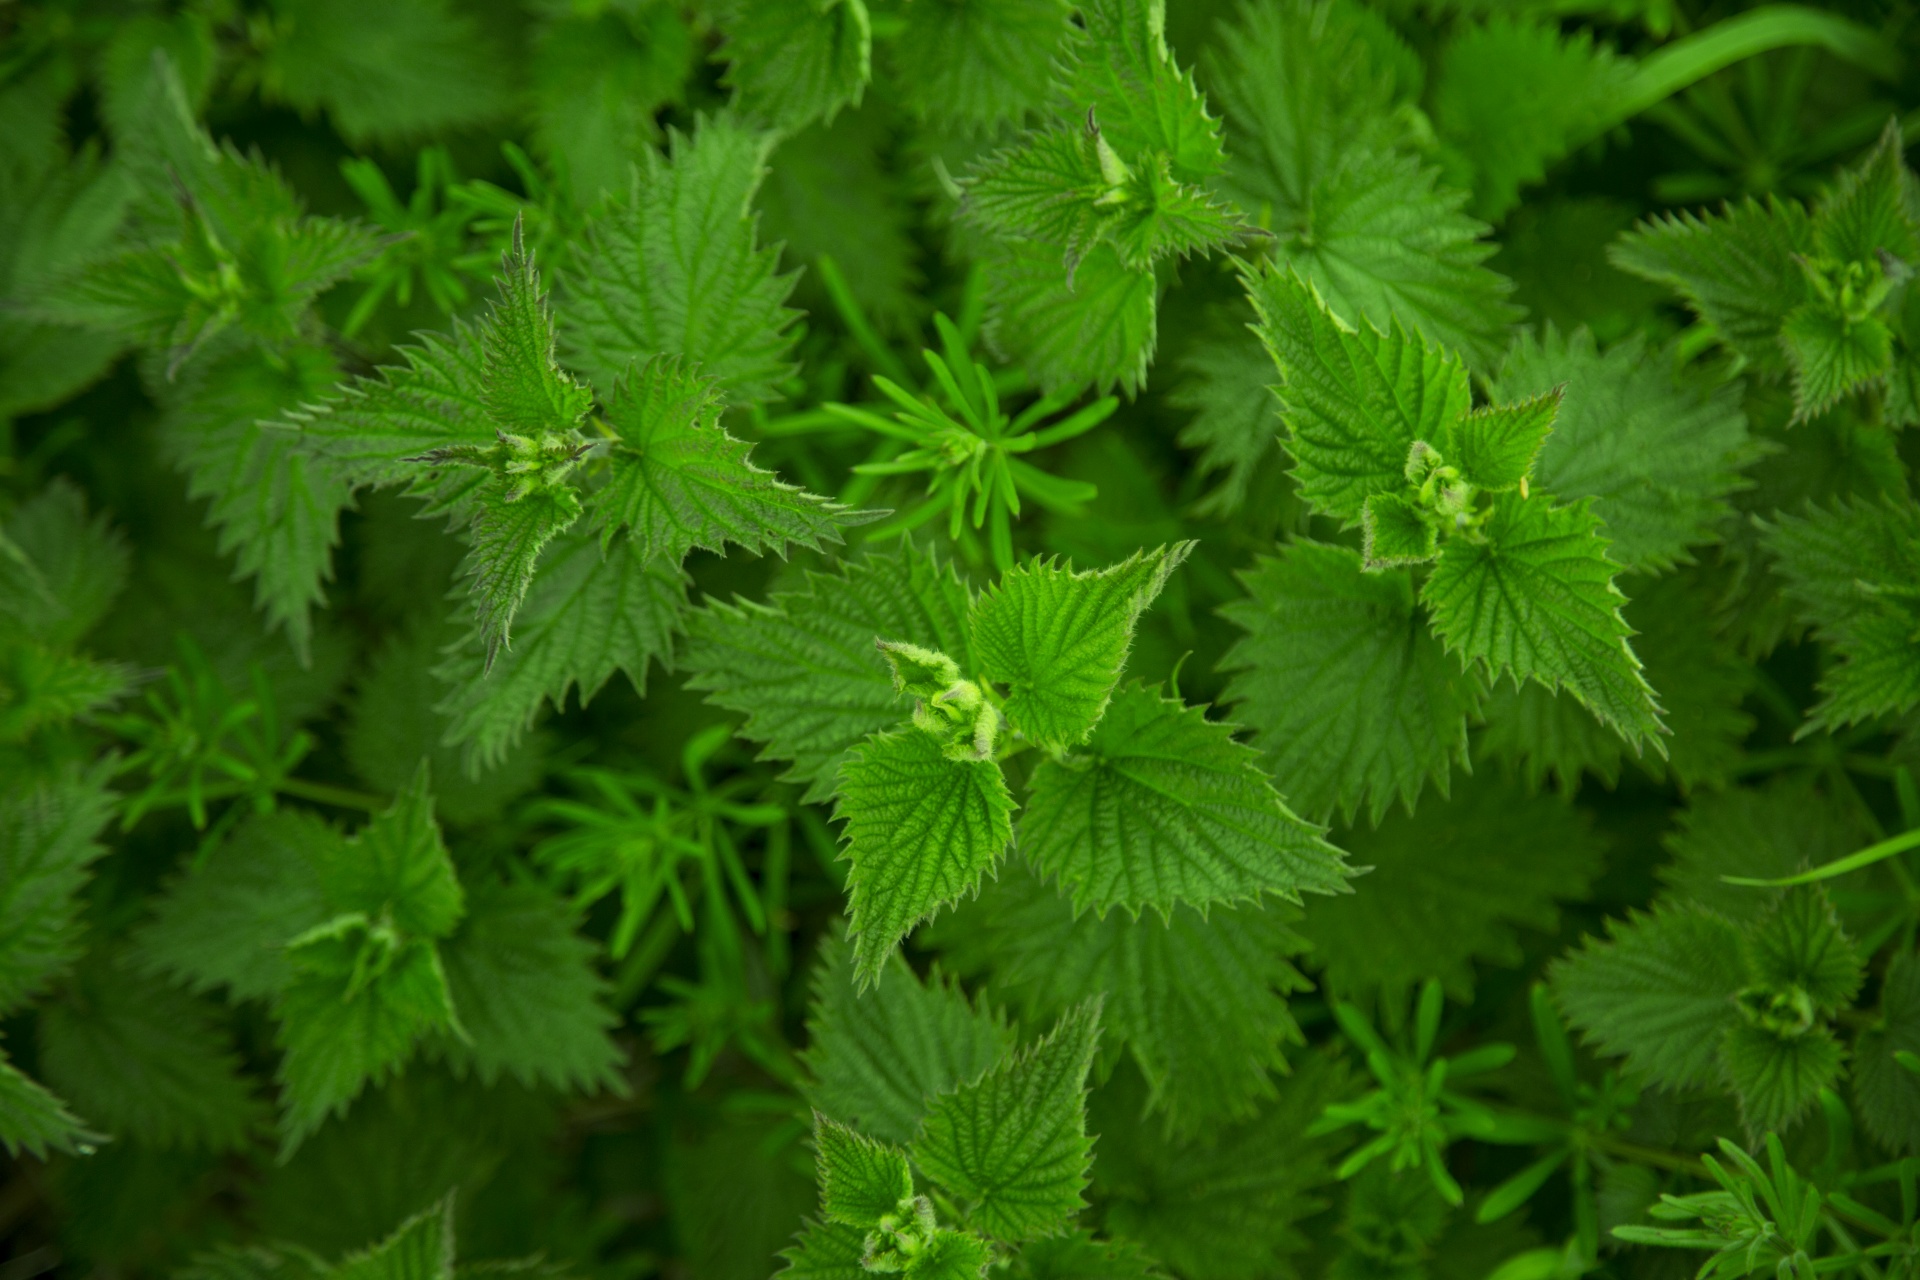 Stinging nettle green plant leaves up close